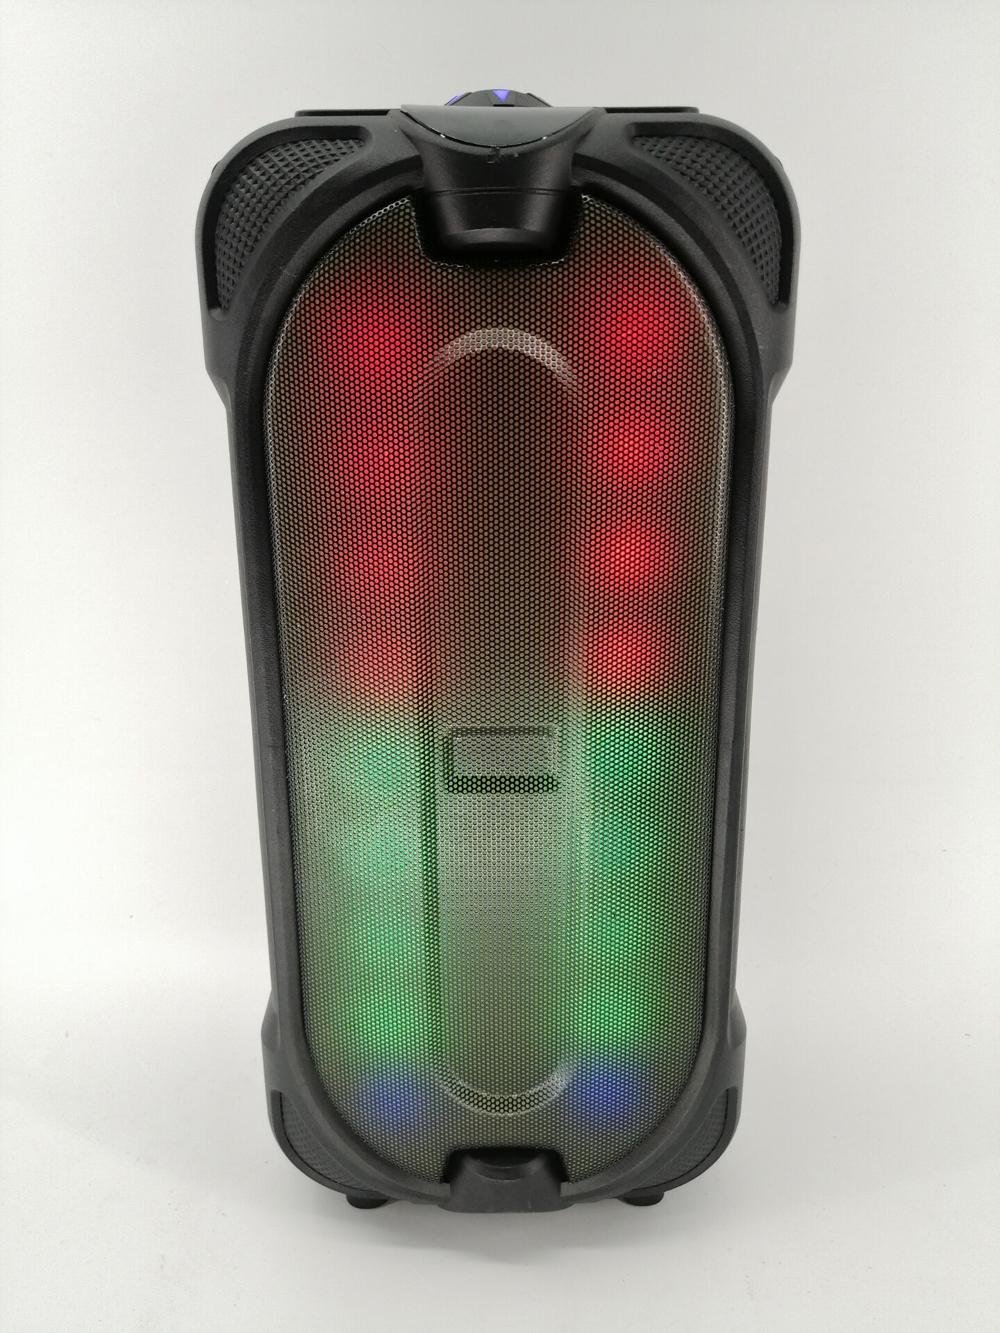 Hot sell dual 4 inch bluetooth speaker colorful lights top quality 3